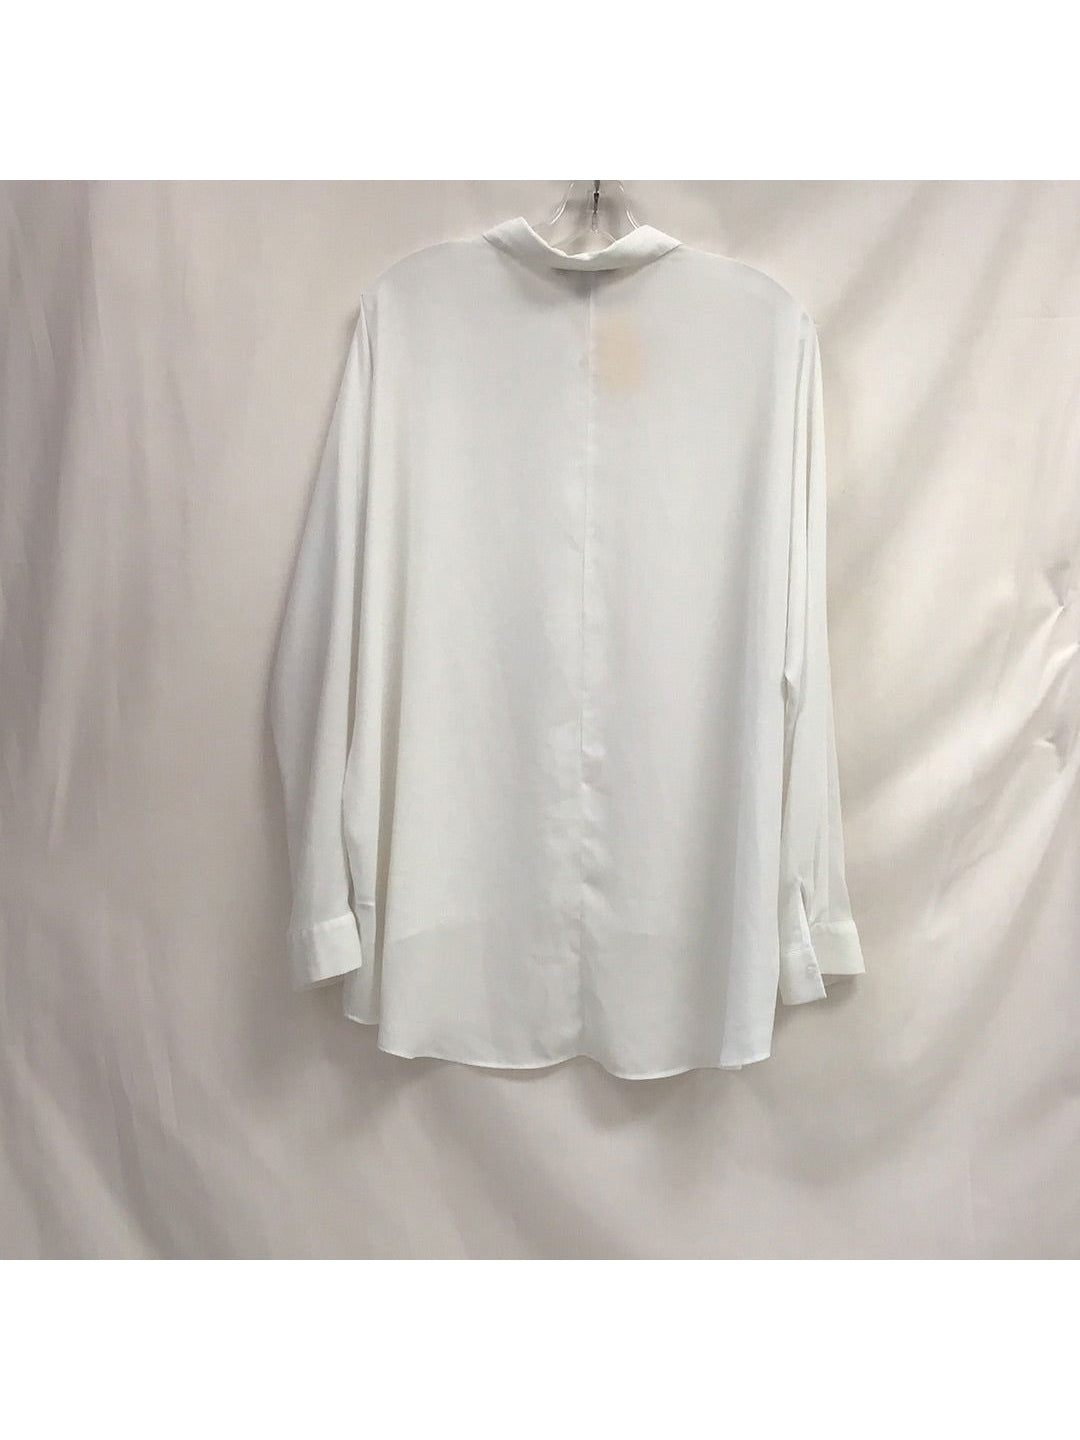 Forever 21 Women White Long Sleeve Shirt Size XL - The Kennedy Collective Thrift - 